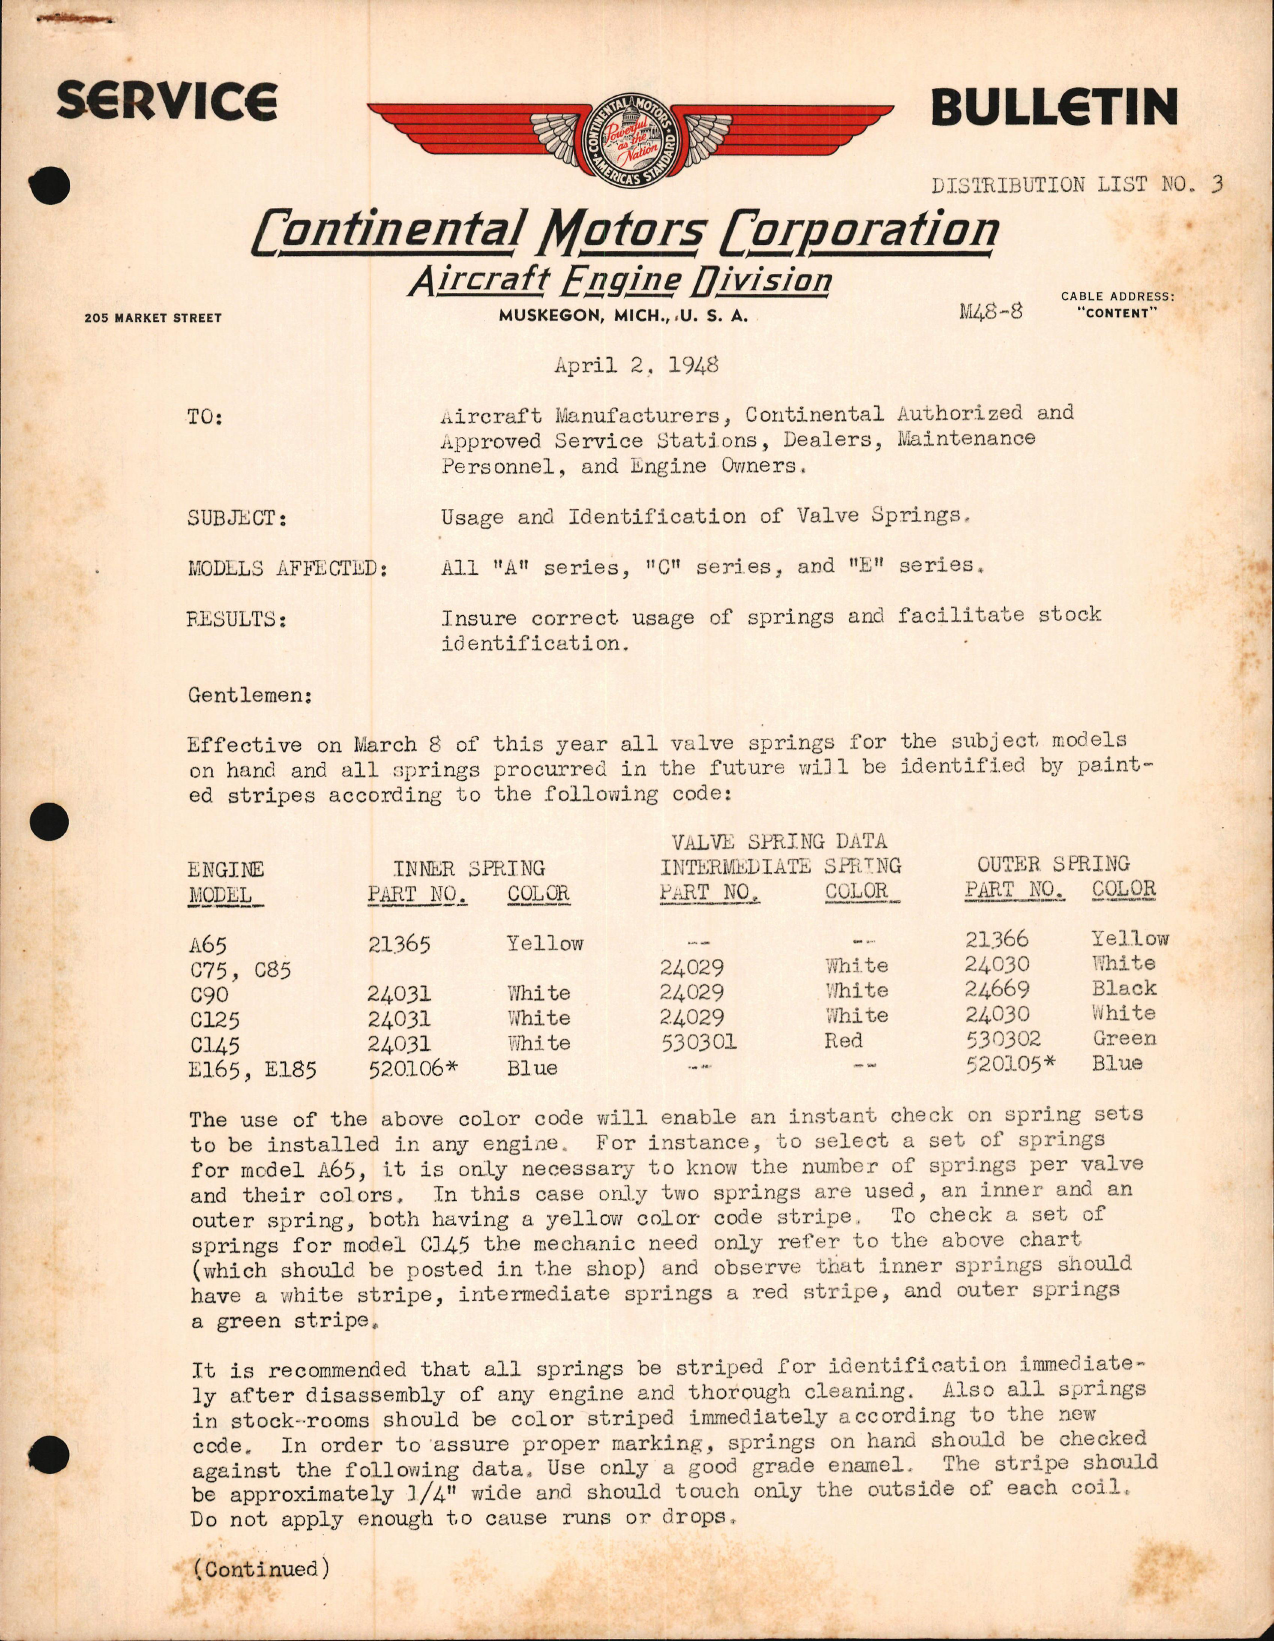 Sample page 1 from AirCorps Library document: Usage & Identification of Valve Springs